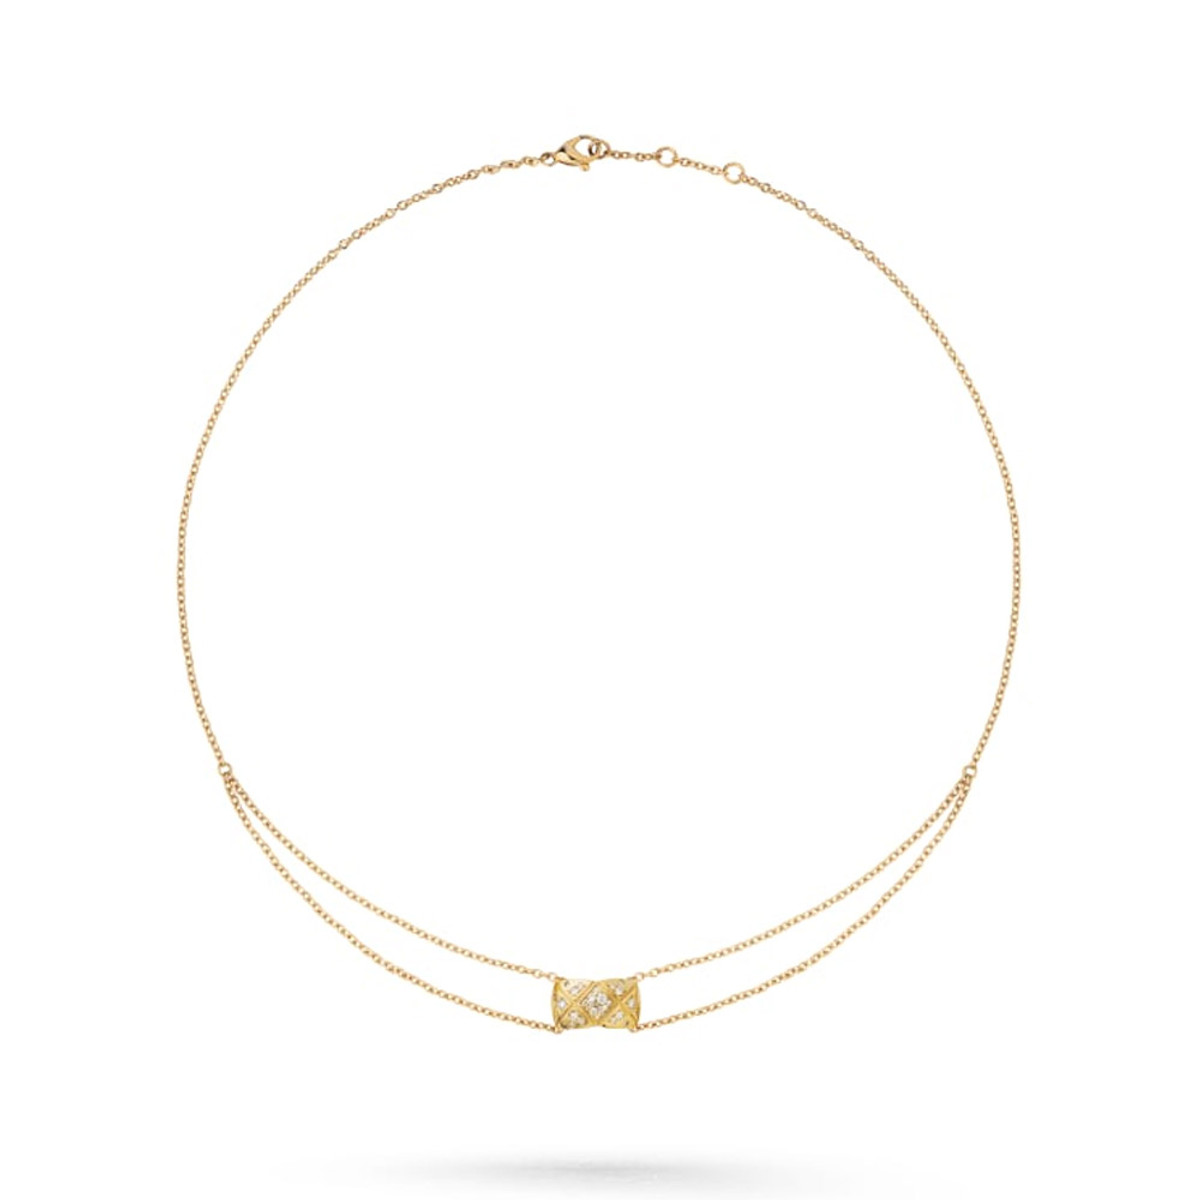 Chanel 18K Yellow Gold Coco Crush Diamond Necklace-25910 Product Image